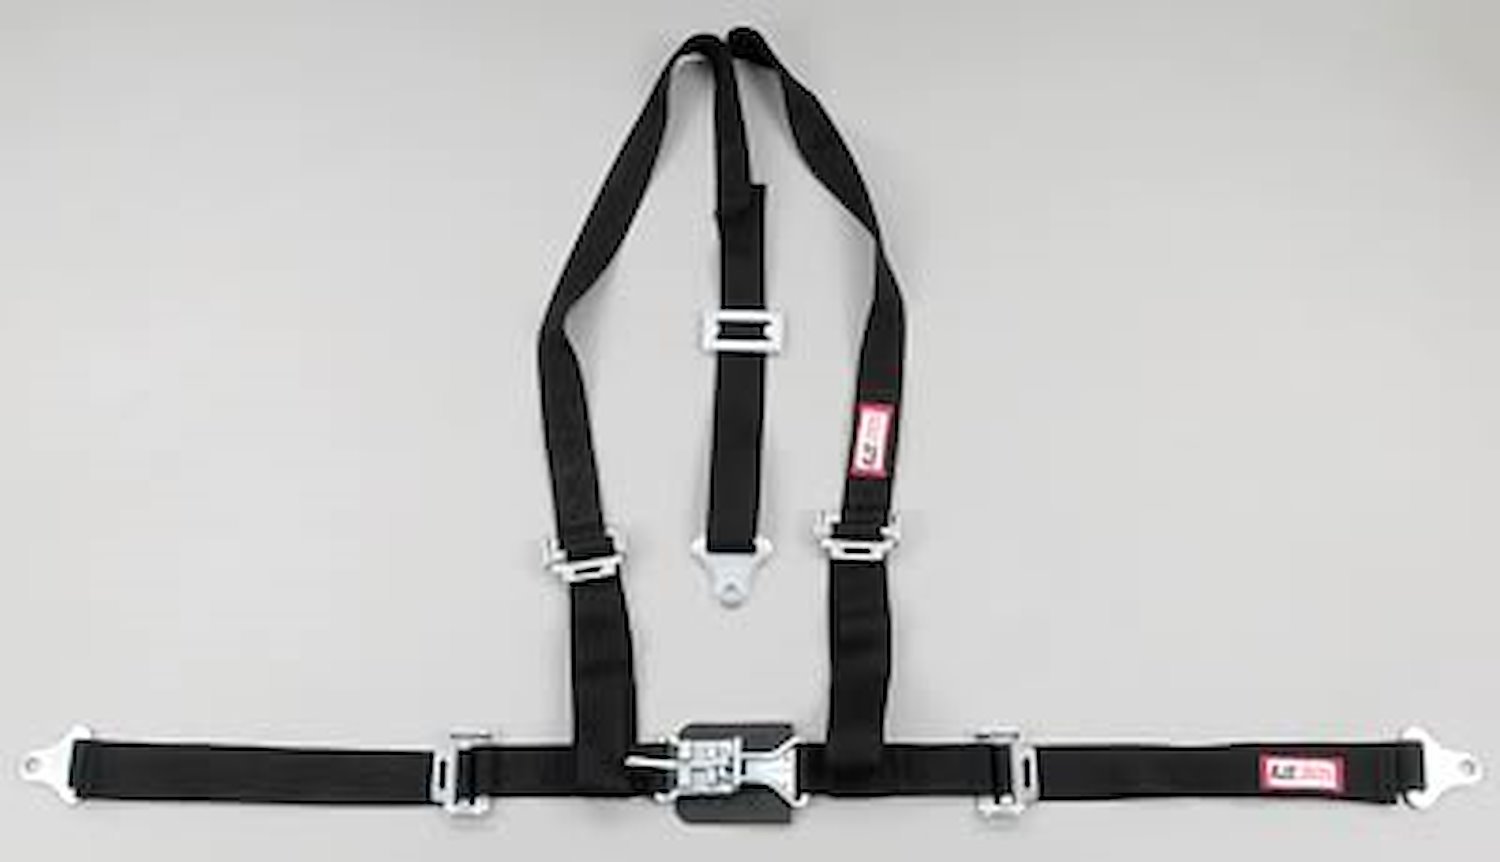 NON-SFI L&L HARNESS 3 PULL DOWN Lap Belt w/Adjuster SNAP 2 S.H. Y FLOOR Mount w/STERNUM STRAP WRAP/SNAP HOT PINK